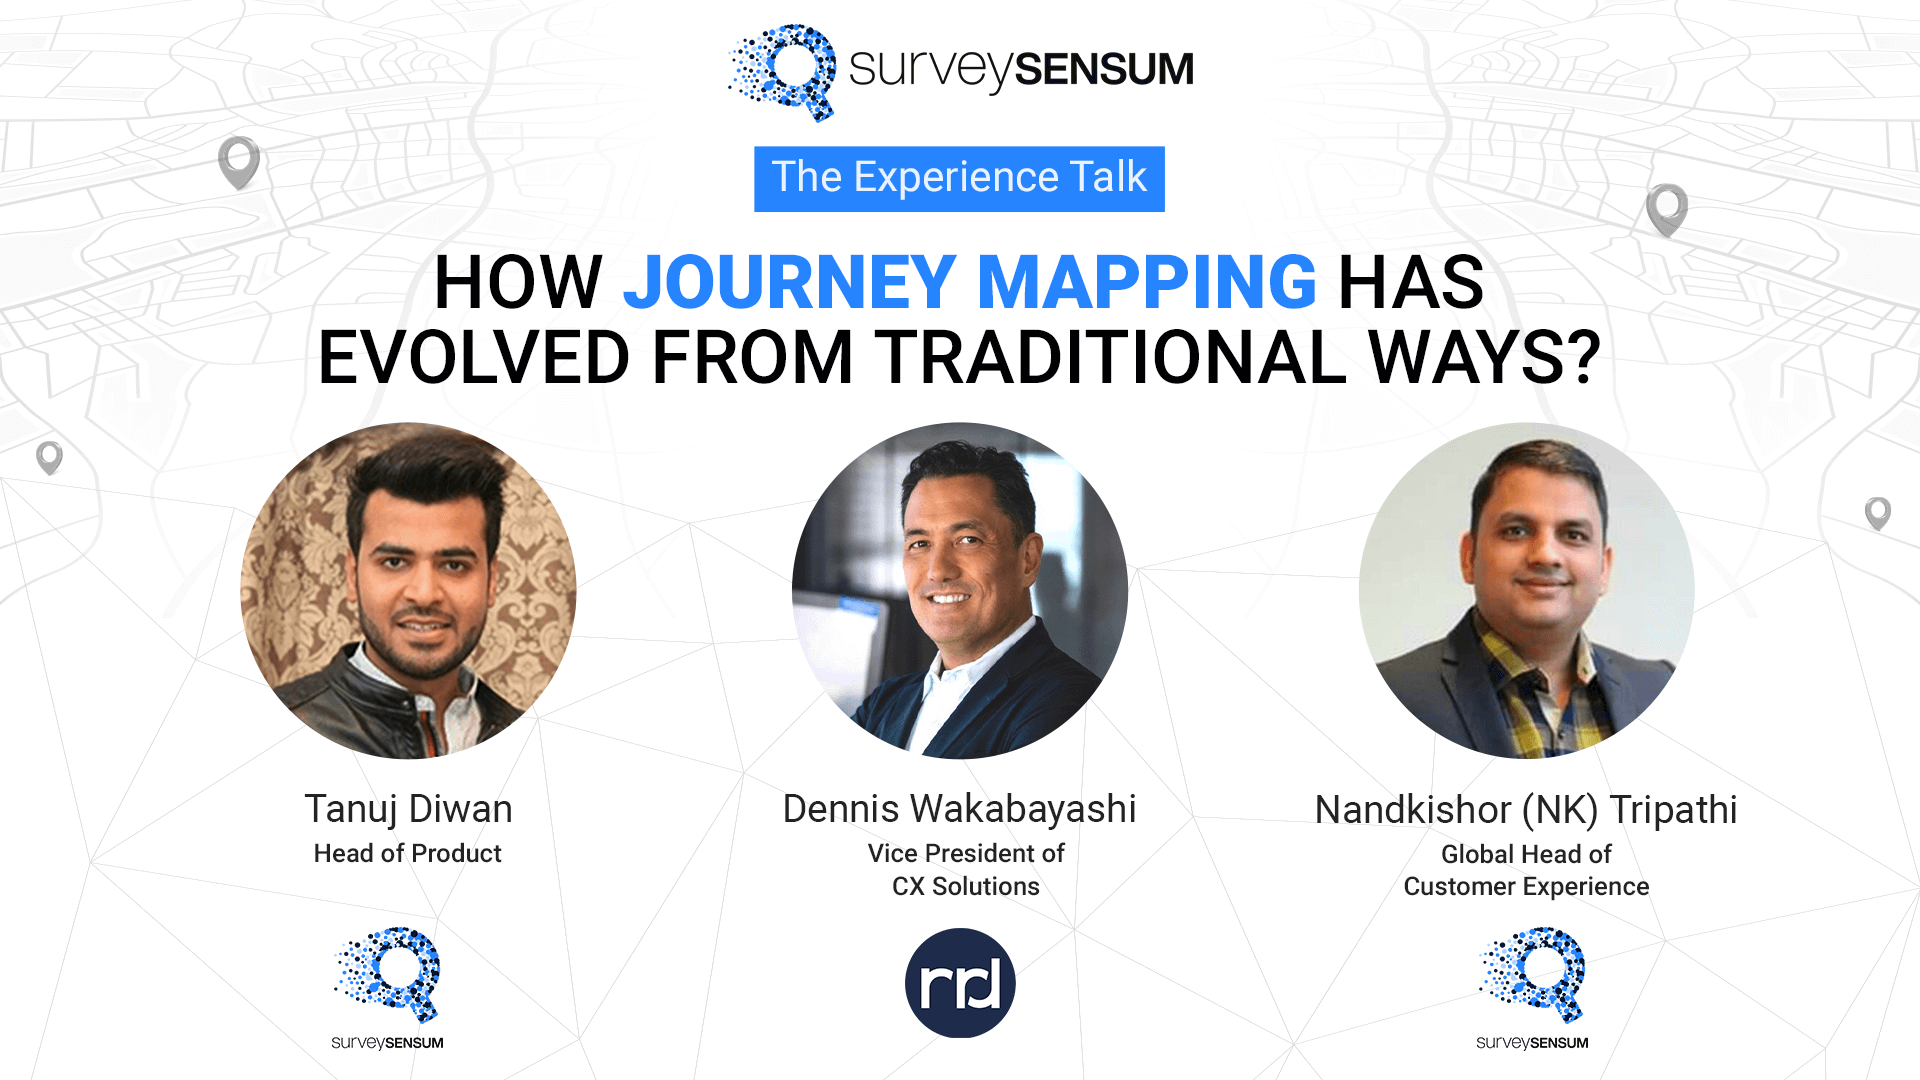 How journey mapping has evolved from traditional ways